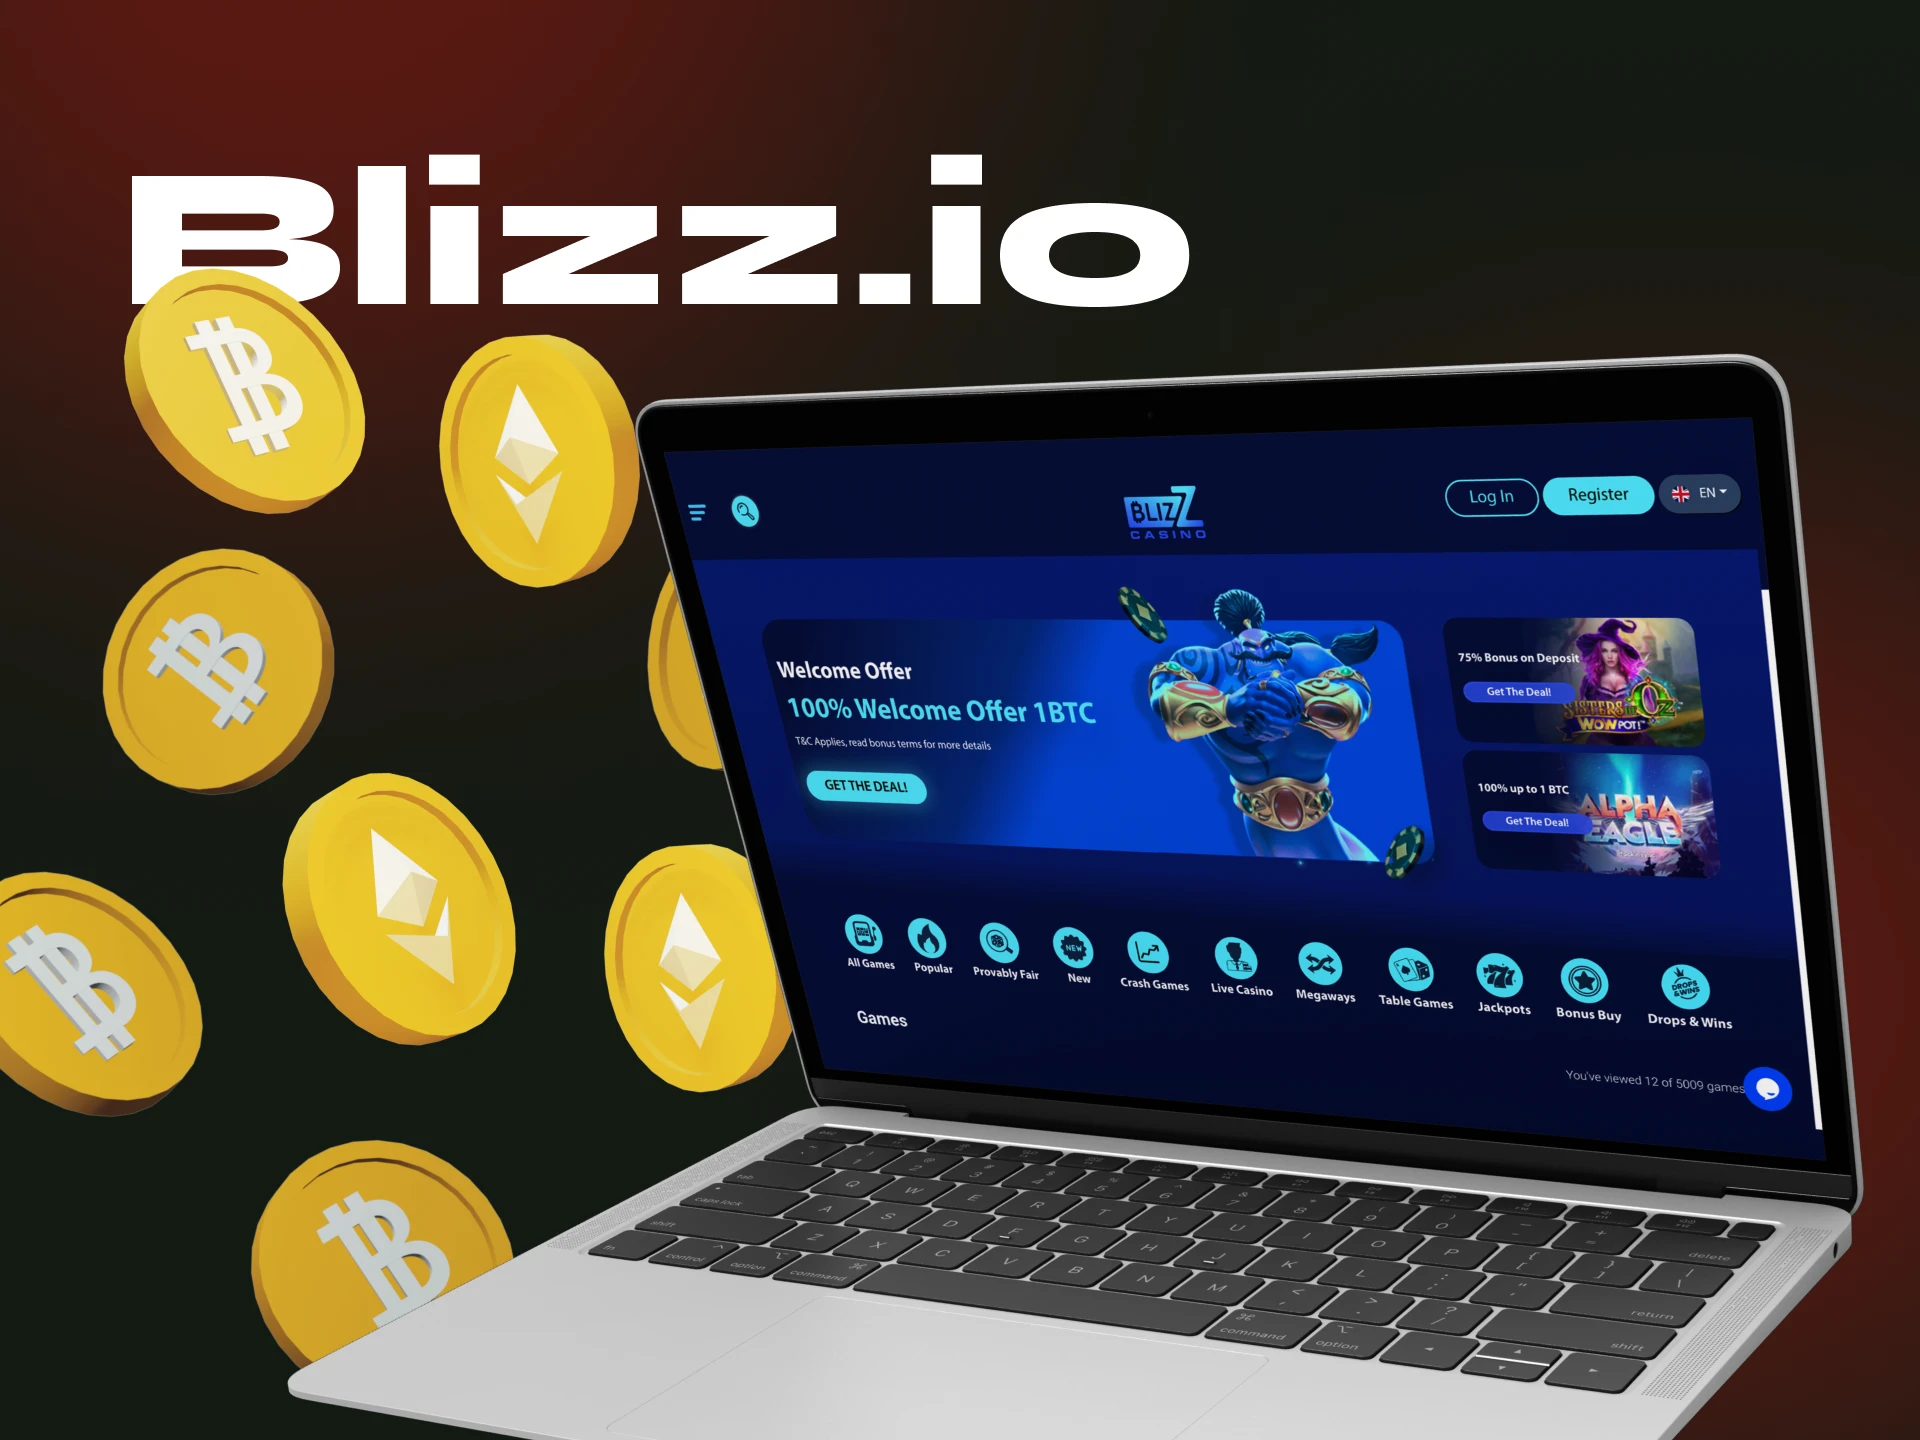 What cryptocurrencies can I use to deposit at the Blizz.io online casino.